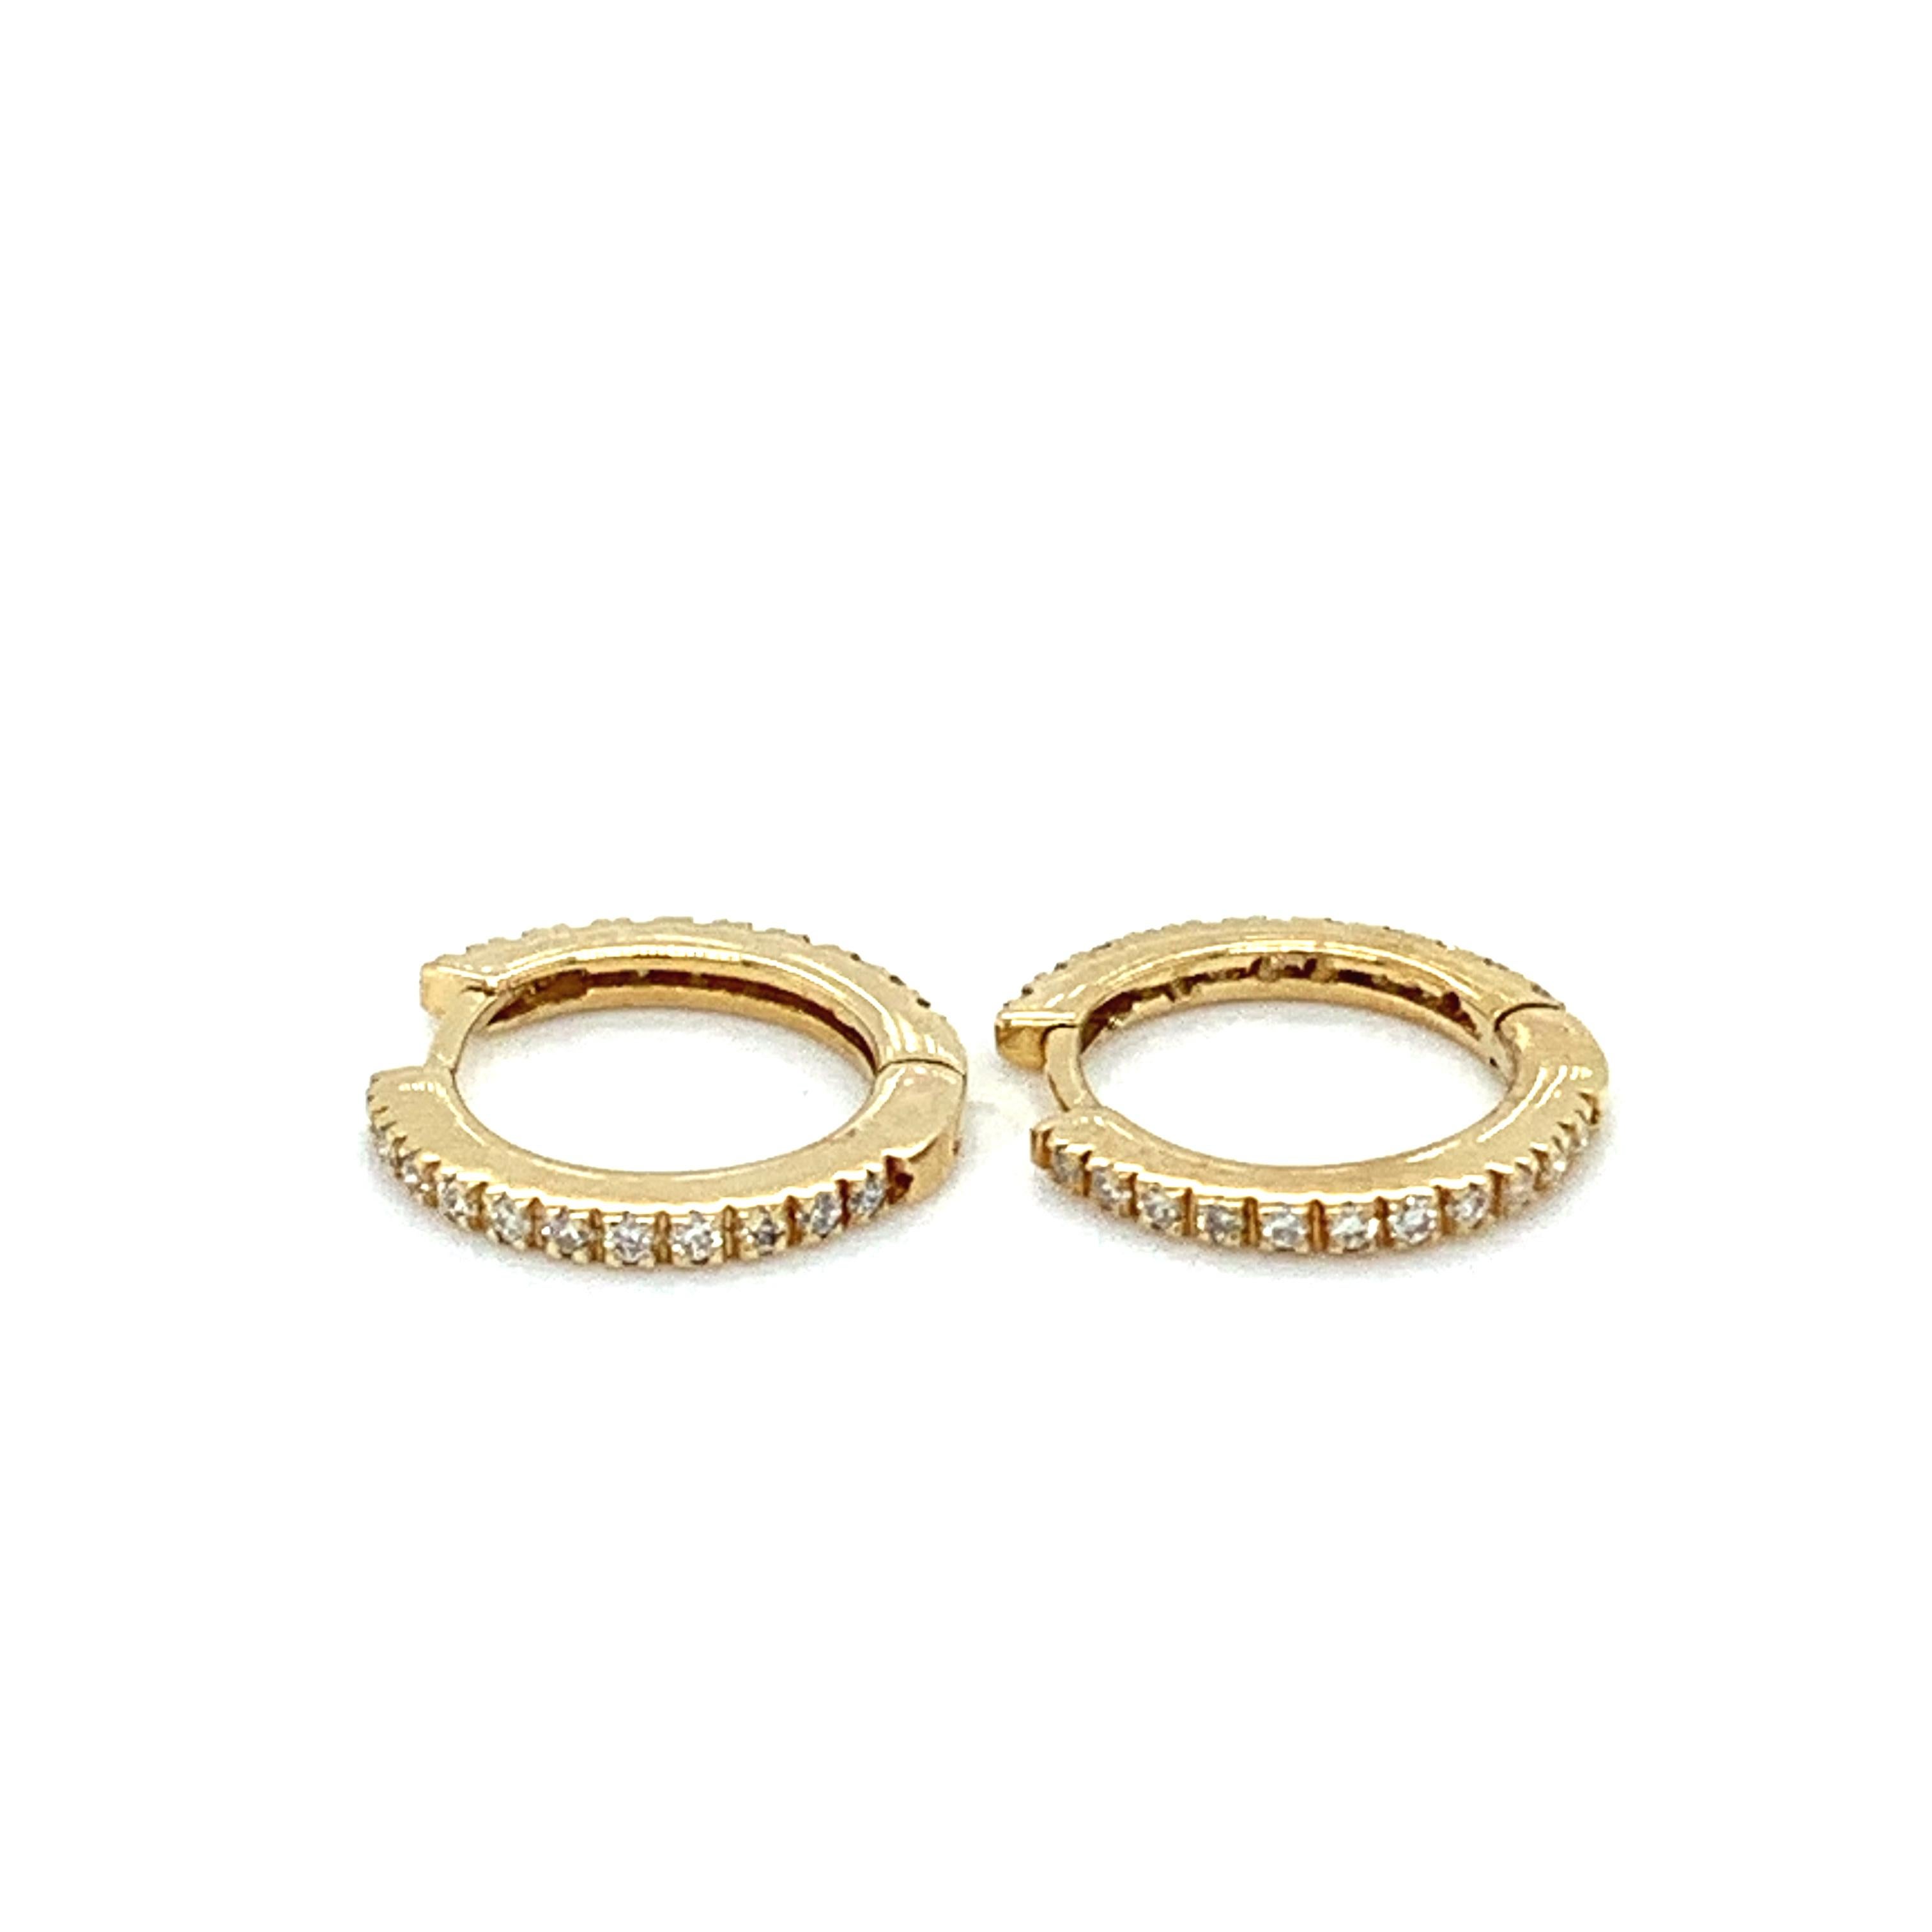 Diamond hoop earrings small 18k yellow gold
Round diamond cut eternity pave setting total diamond weight 0.42ct F colour VS1 clarity, hallmarked
Measurements approx 12mm width 1mm very fine petite hoop earrings 
Accompanied by valuation.